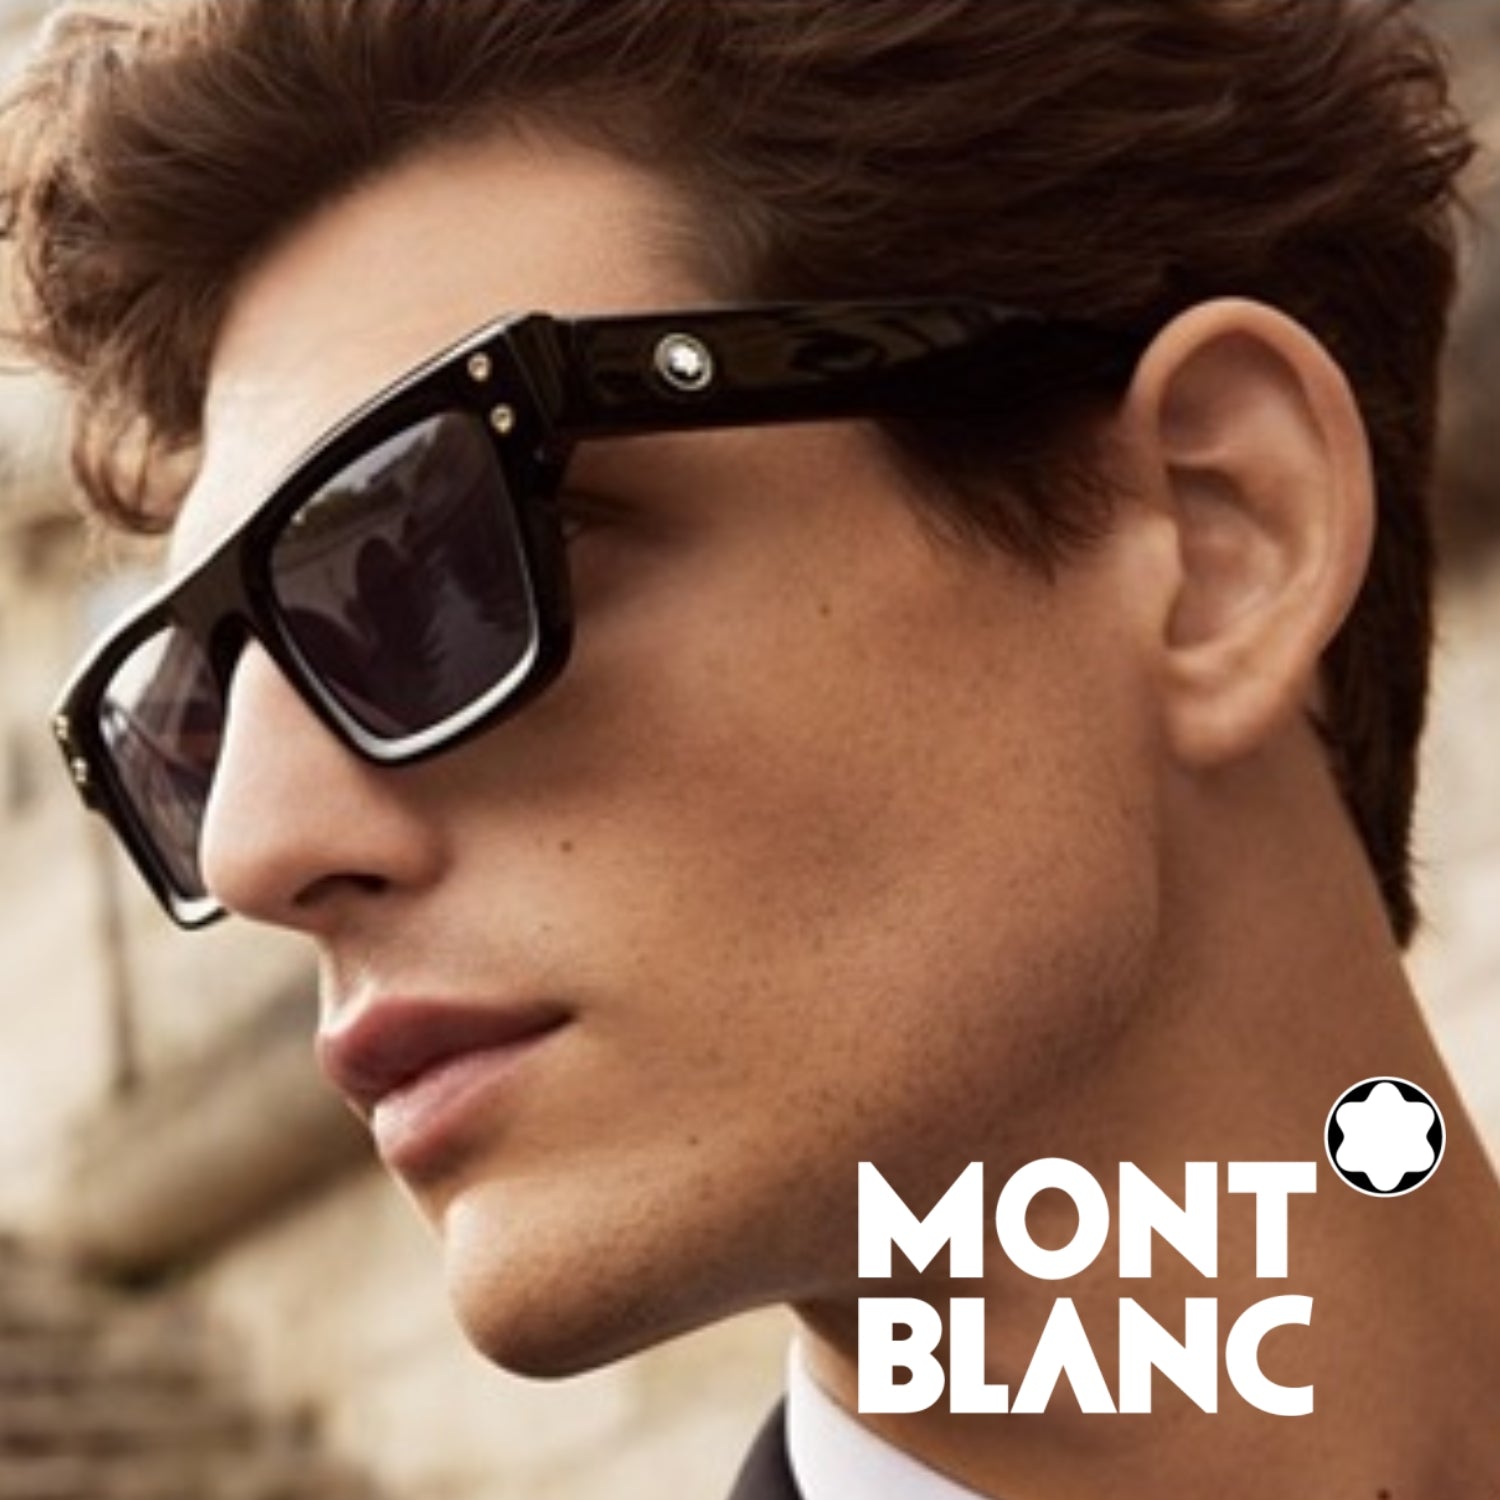 "Optorium Mont Blanc sunglasses for men and women. Stylish opticals for a fashionable look."